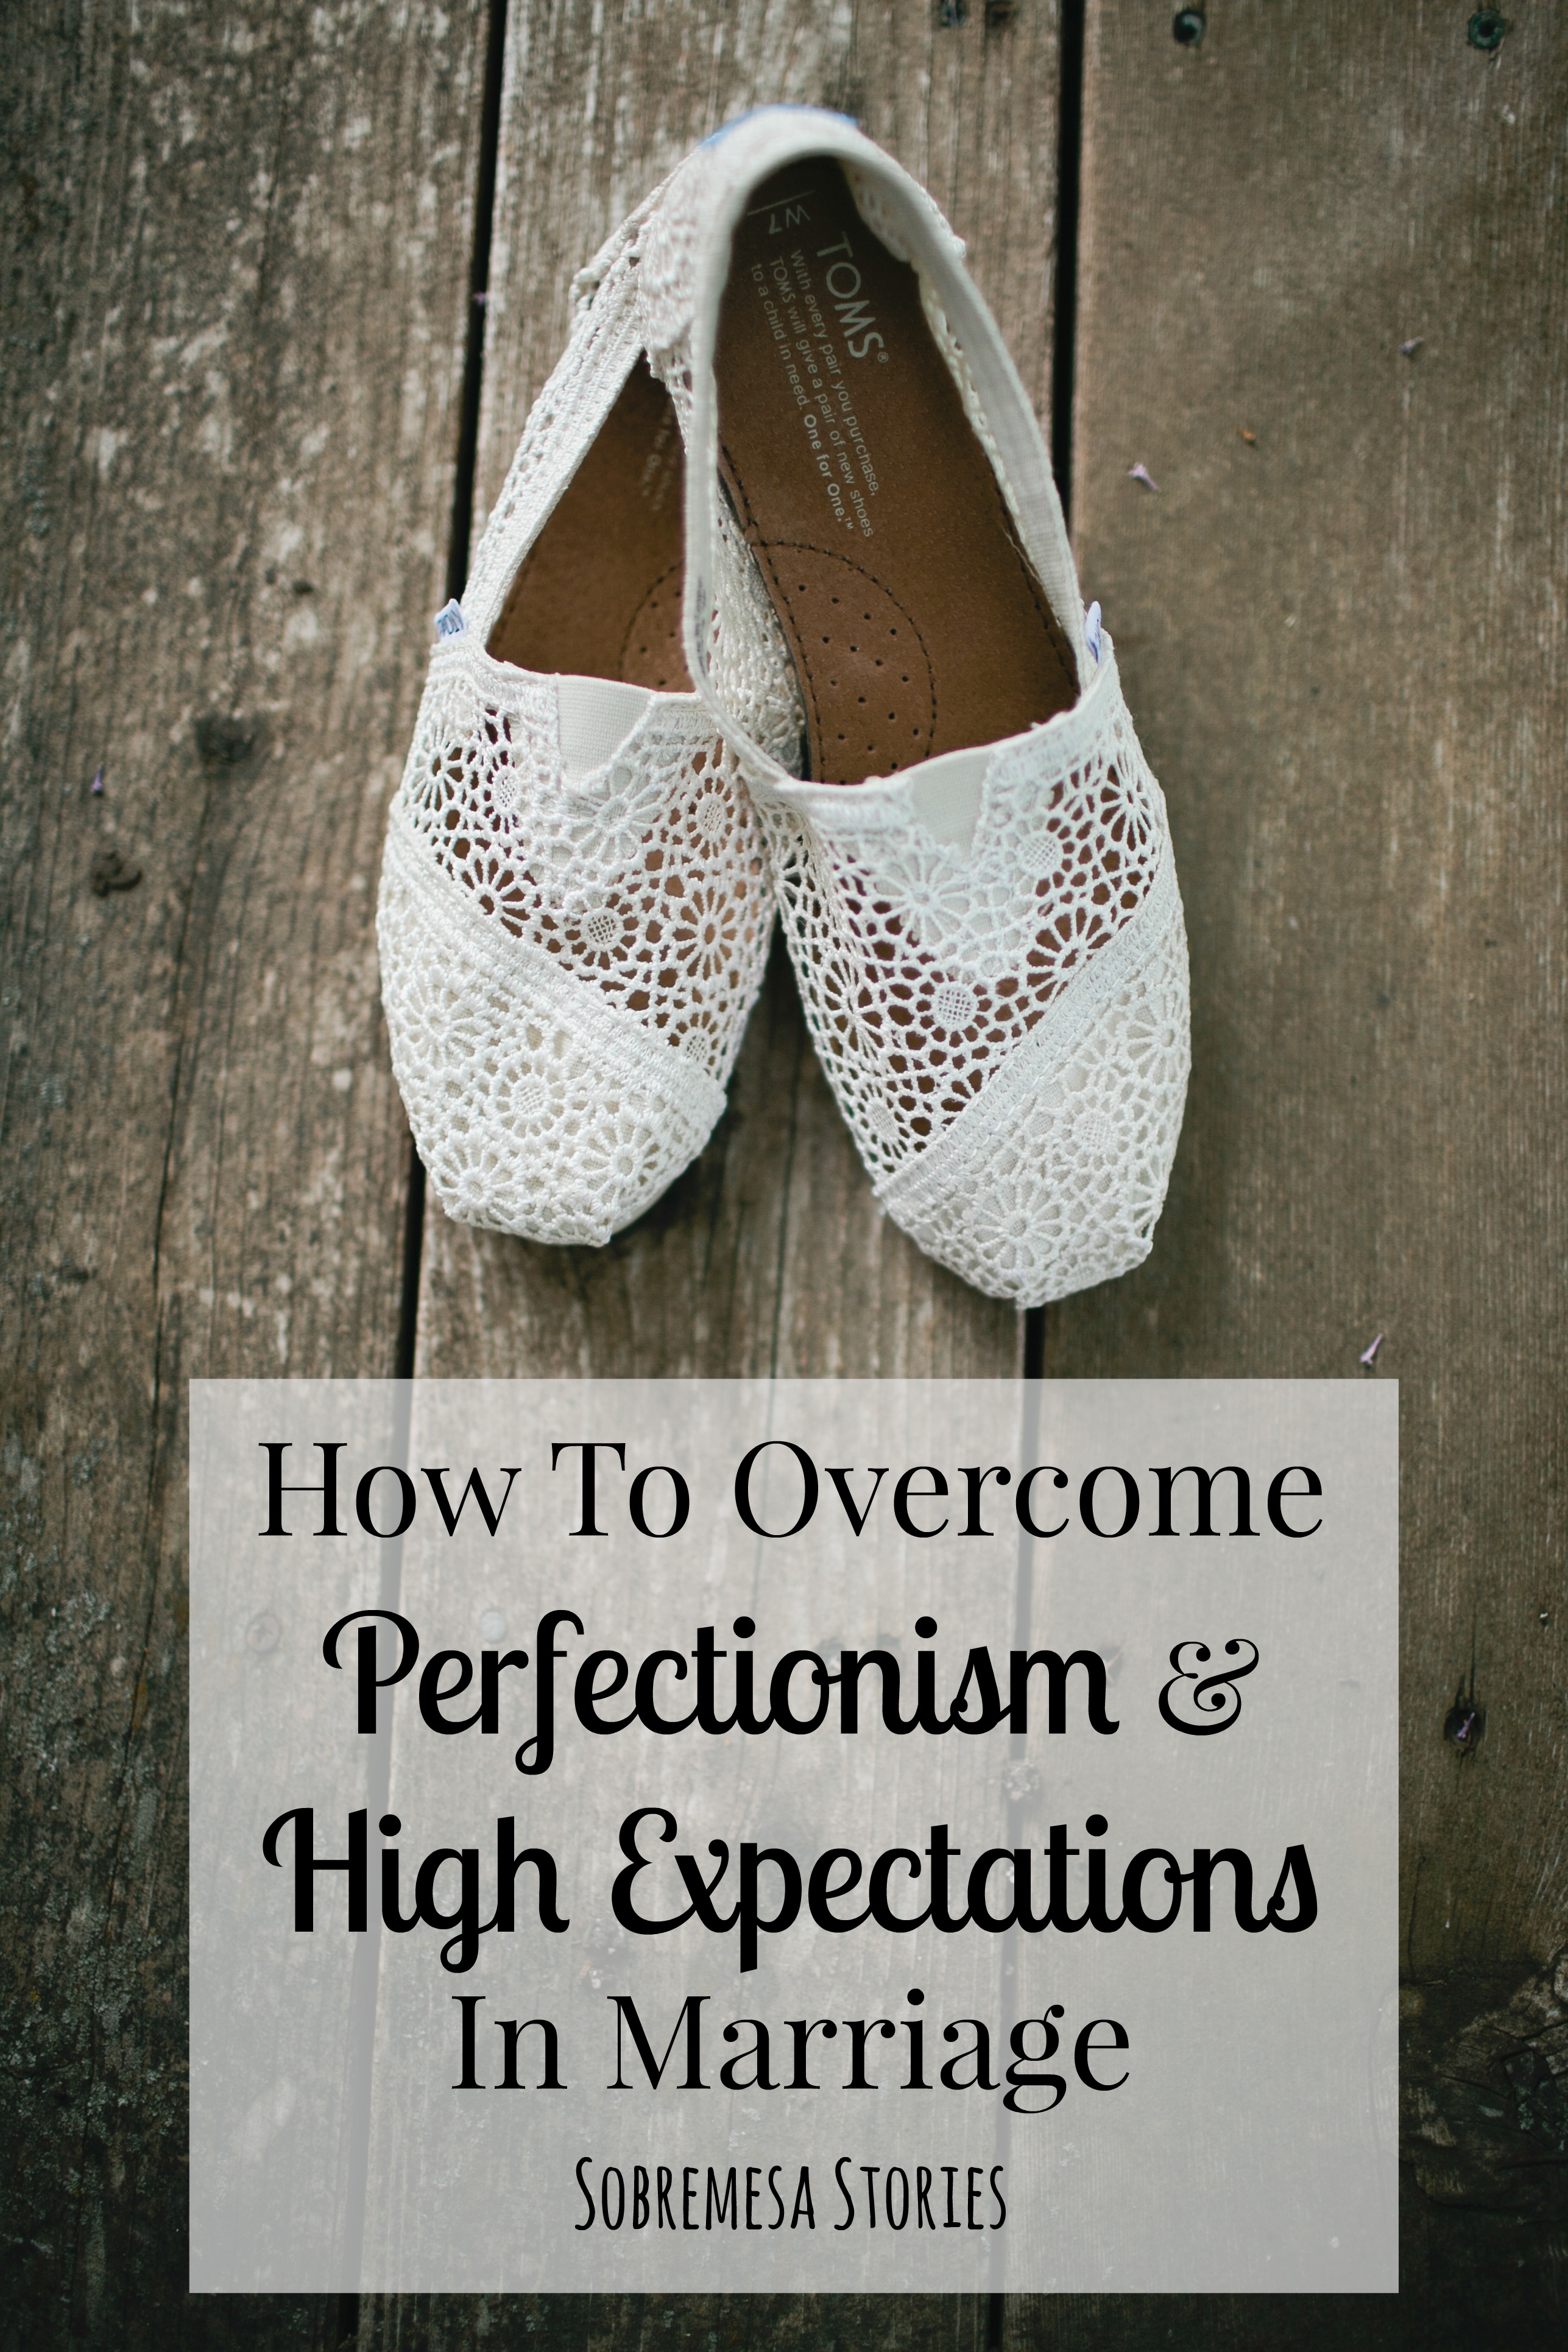 Perfectionism and high expectations in marriage can lead to all sorts of bitterness. This article explores how to move past them to love our spouses and significant others well!